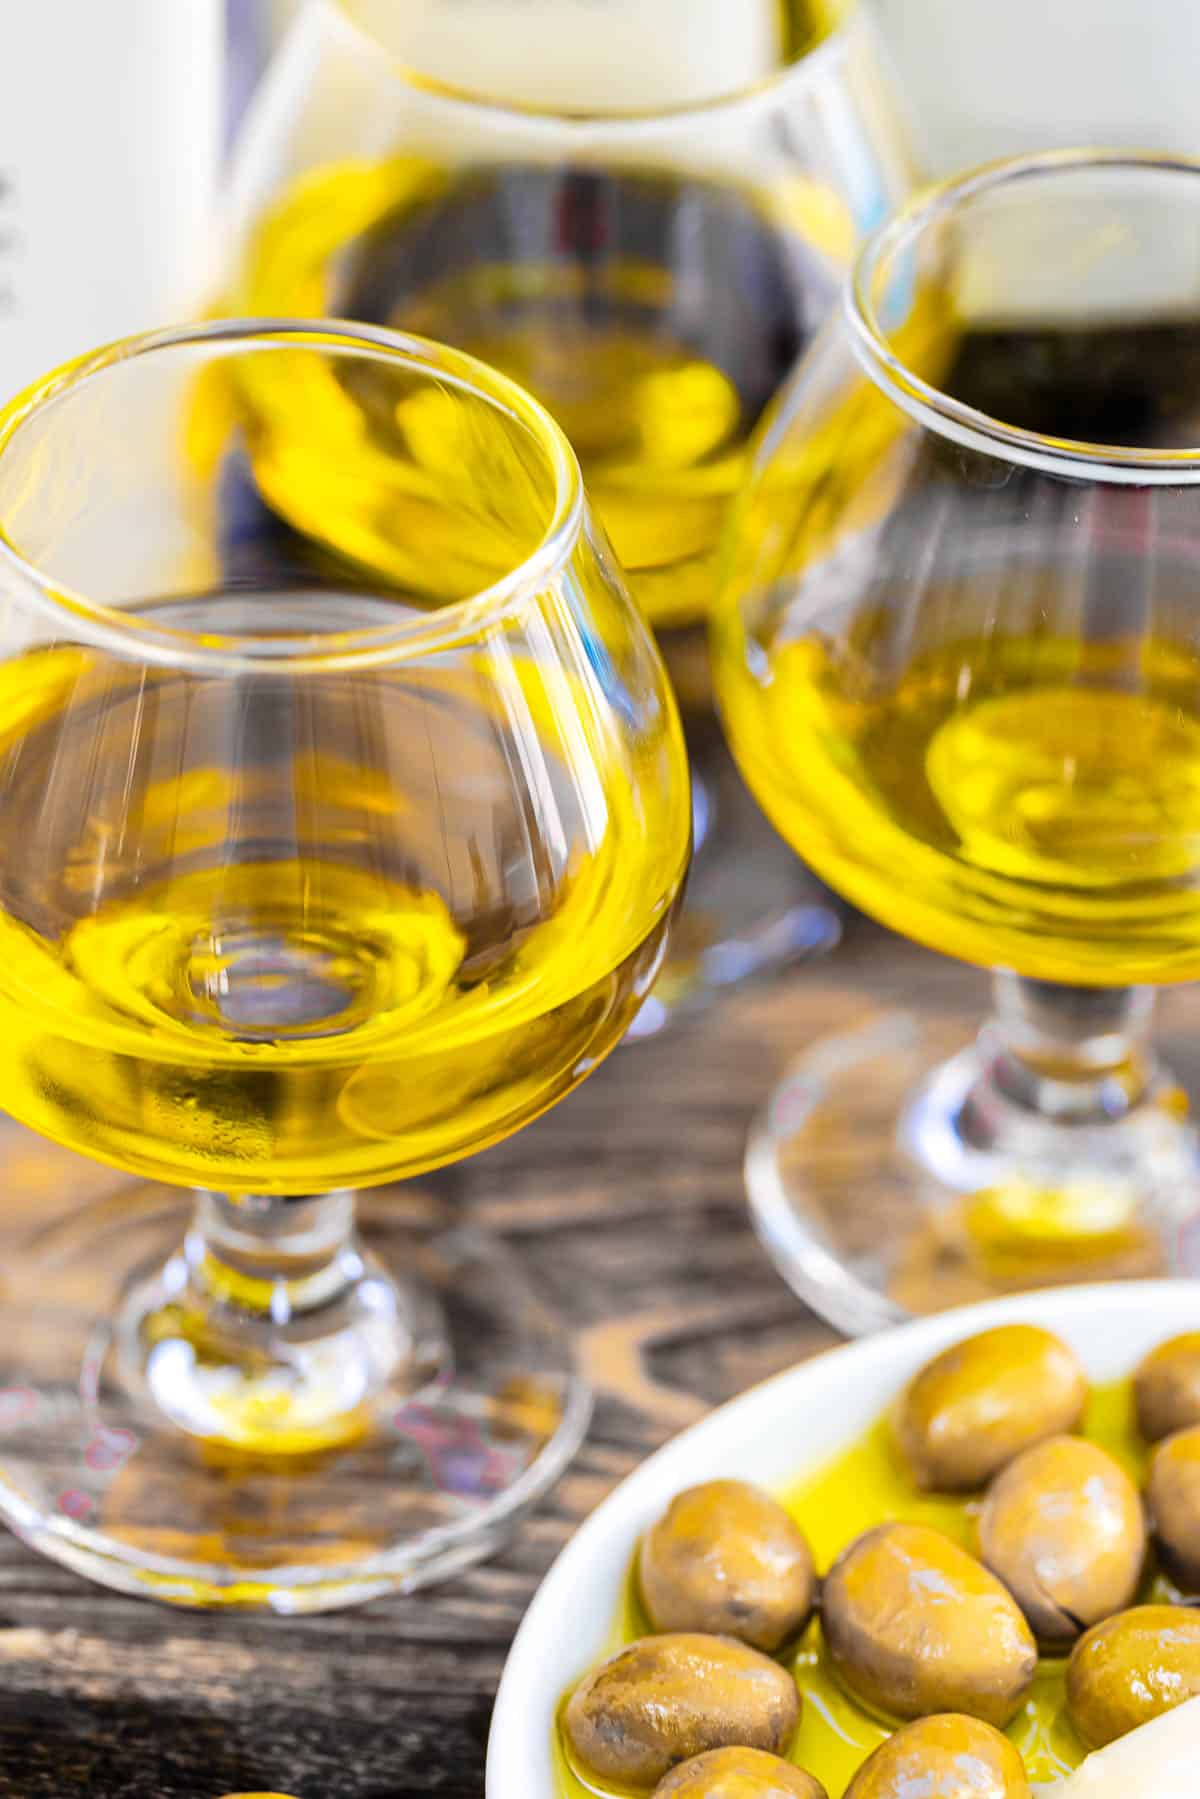 a close up of 3 glasses of olive oil next to a plate of green olives.